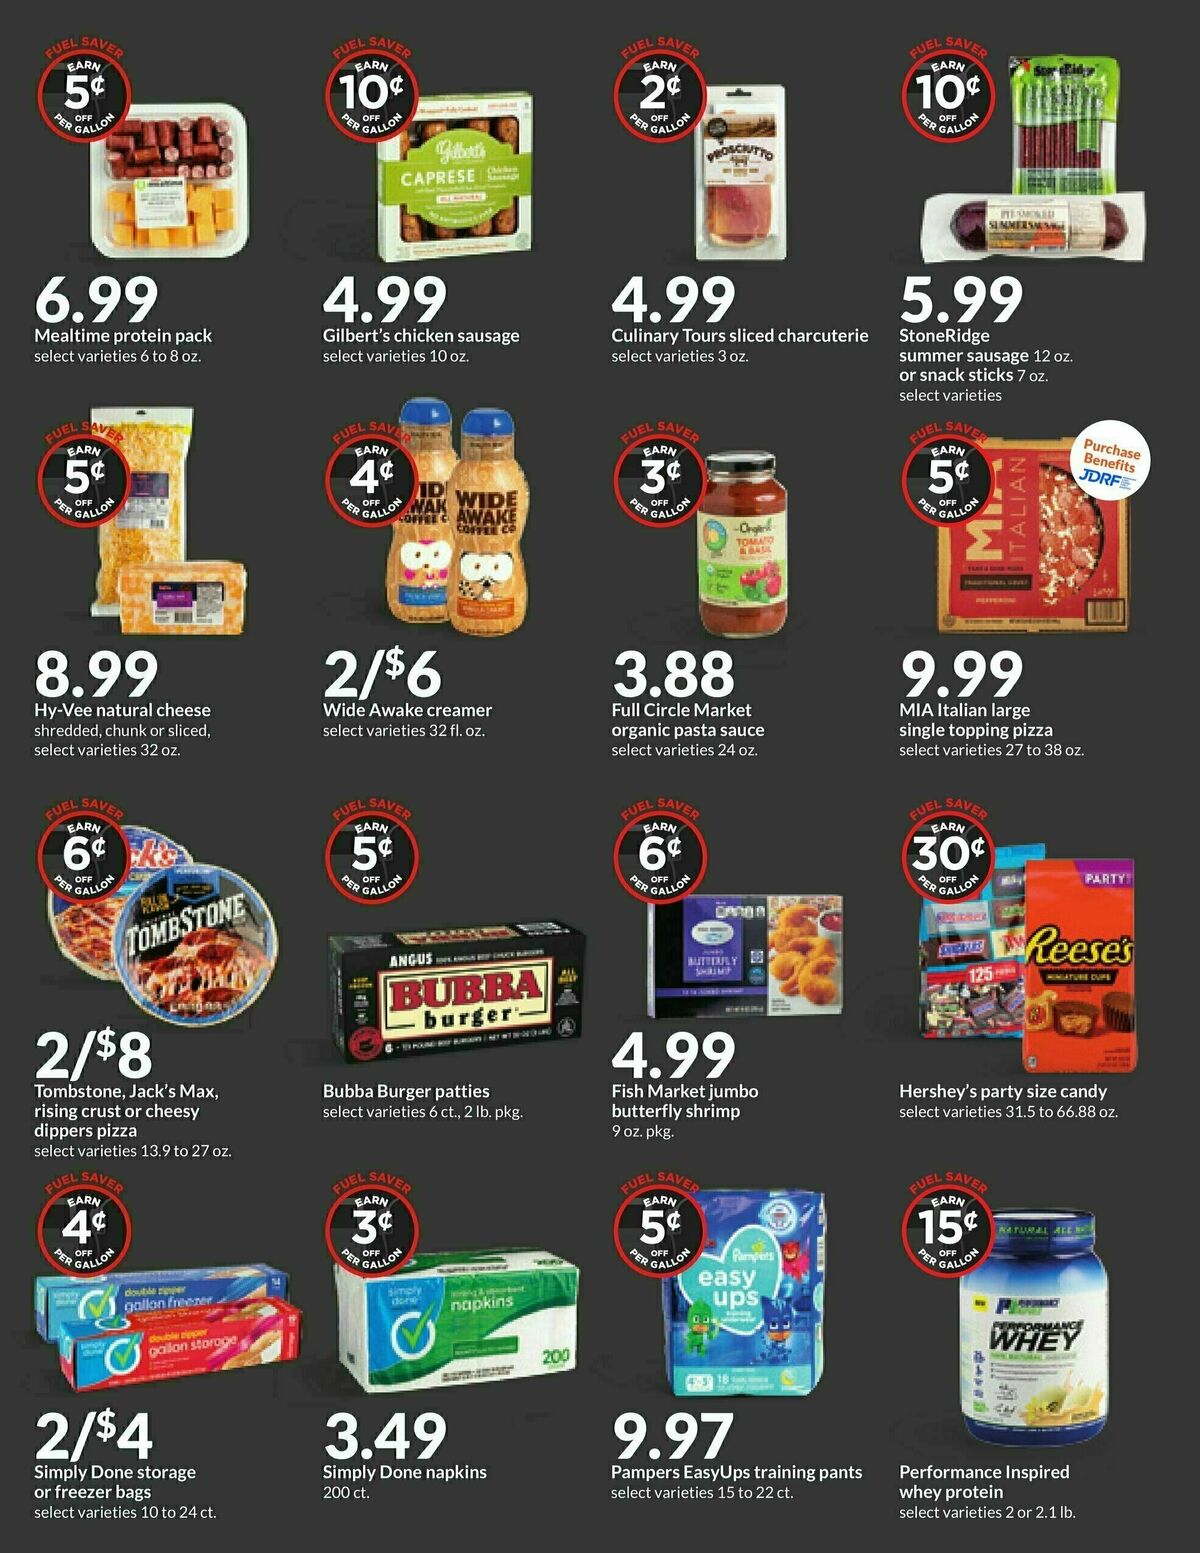 Hy-Vee Weekly Ad from August 21